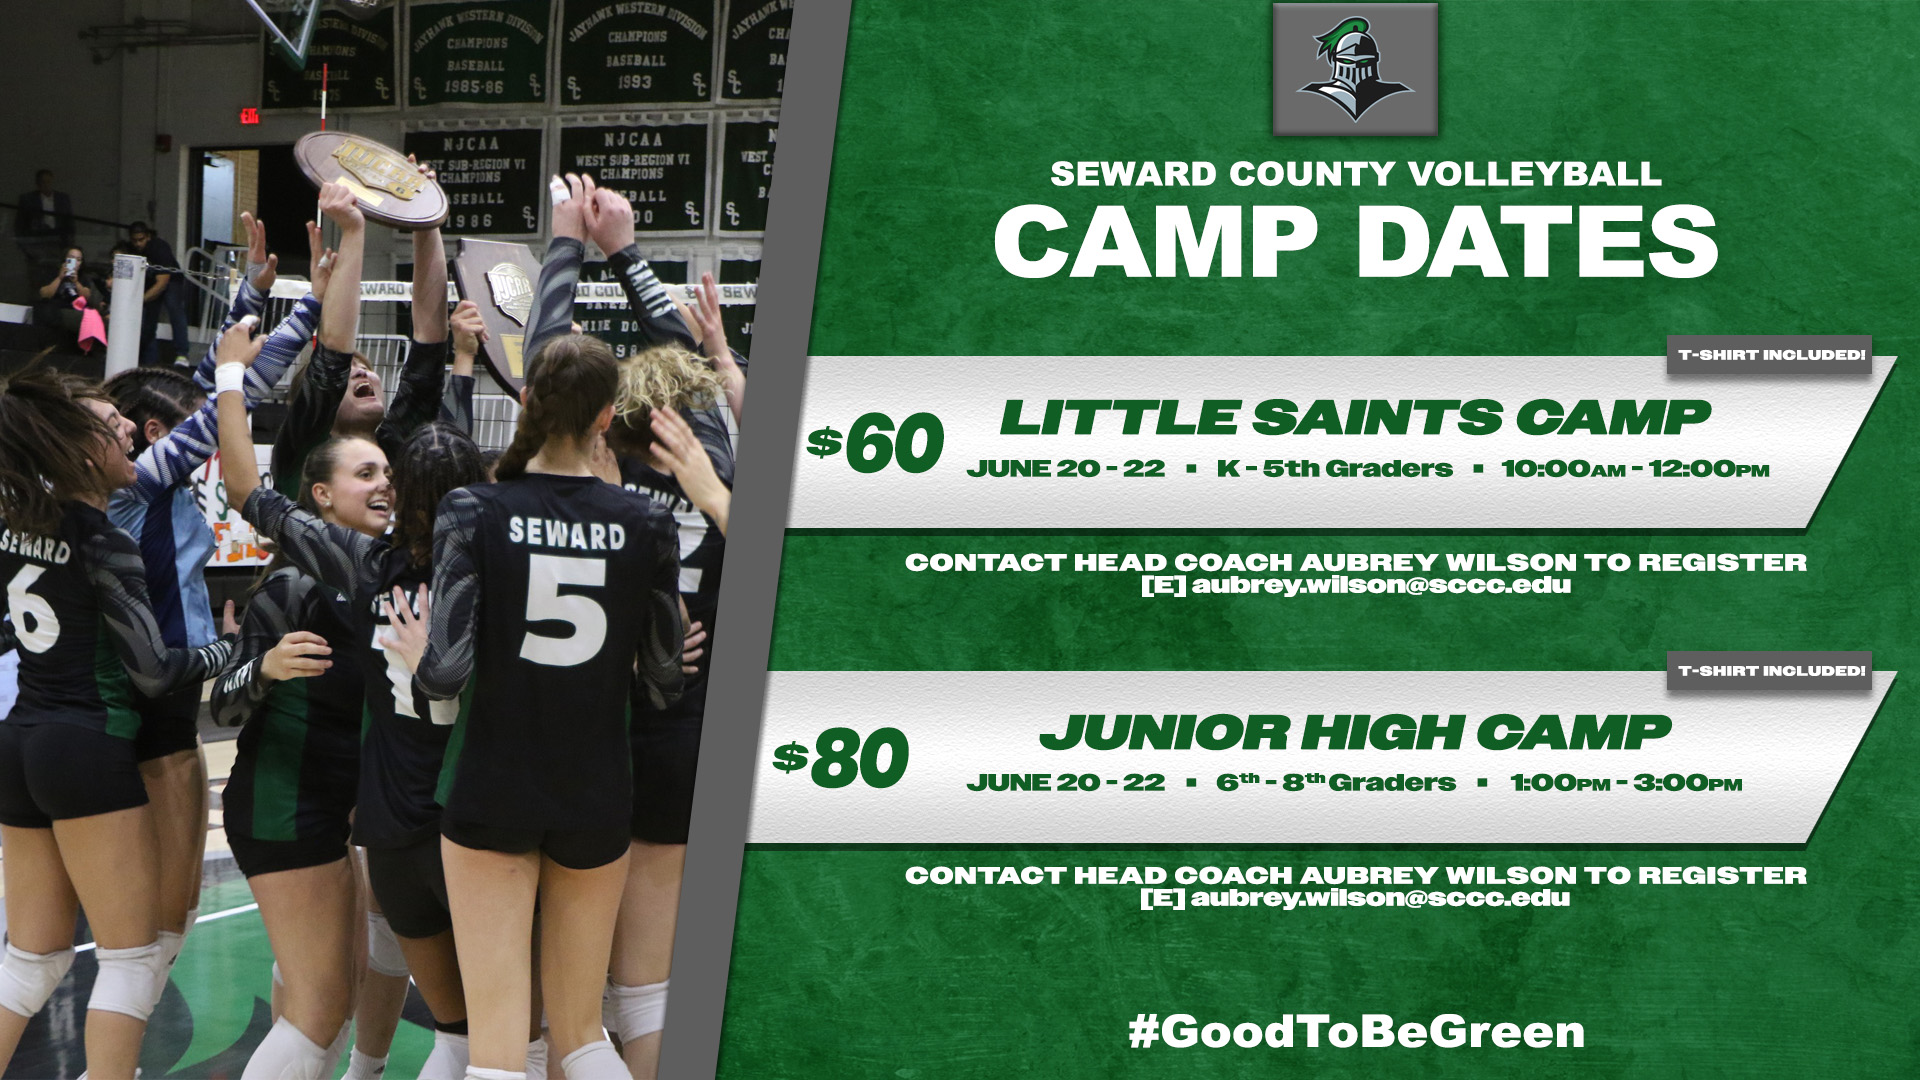 Seward Hosts Youth Volleyball Camps in June